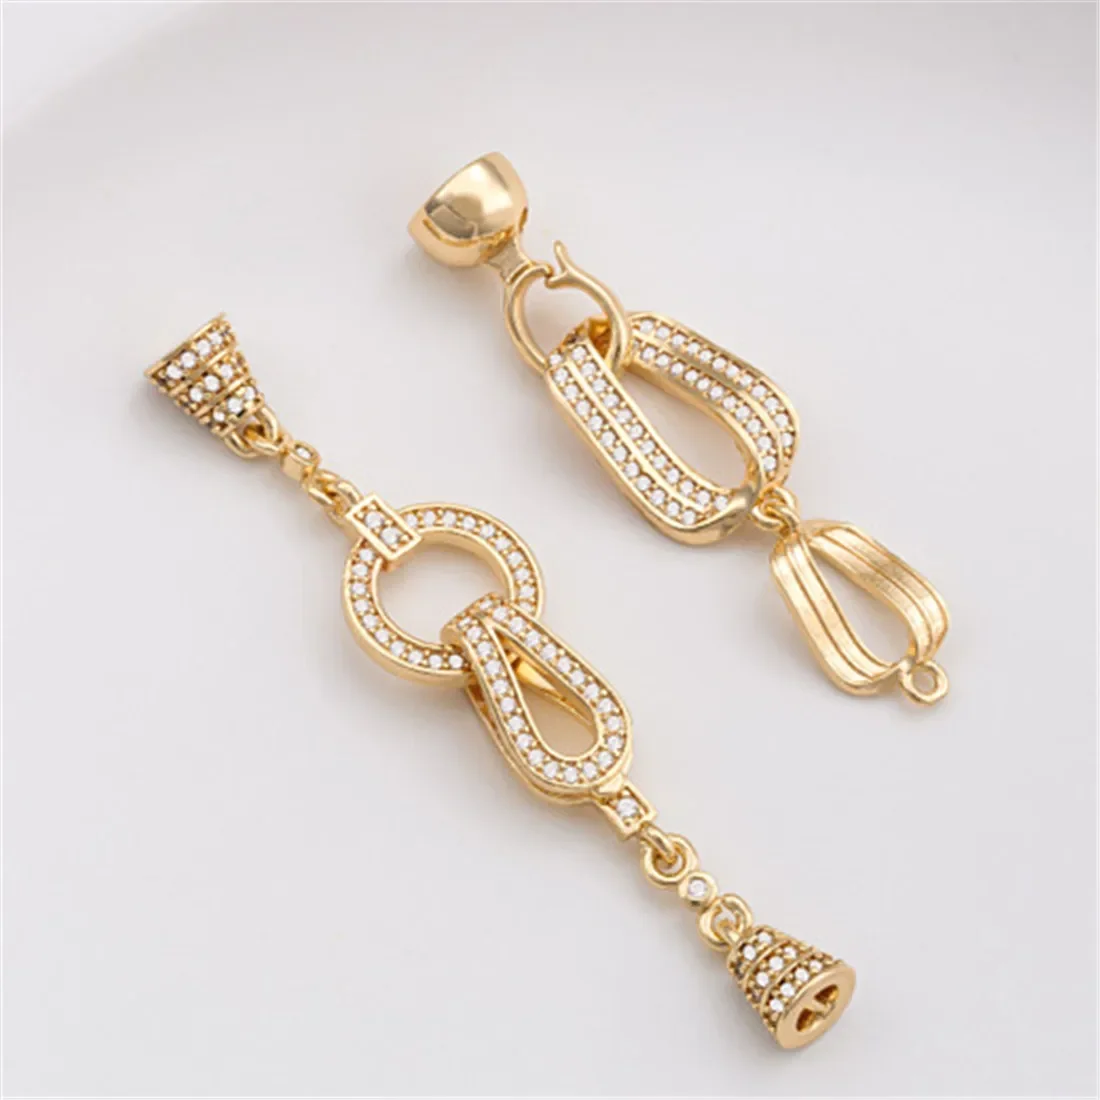 

14K Gold Inlaid Zirconium Long Clause Jewelry Buckle Handcrafted Pearl Necklace Chain Connection Closure Buckle Accessories